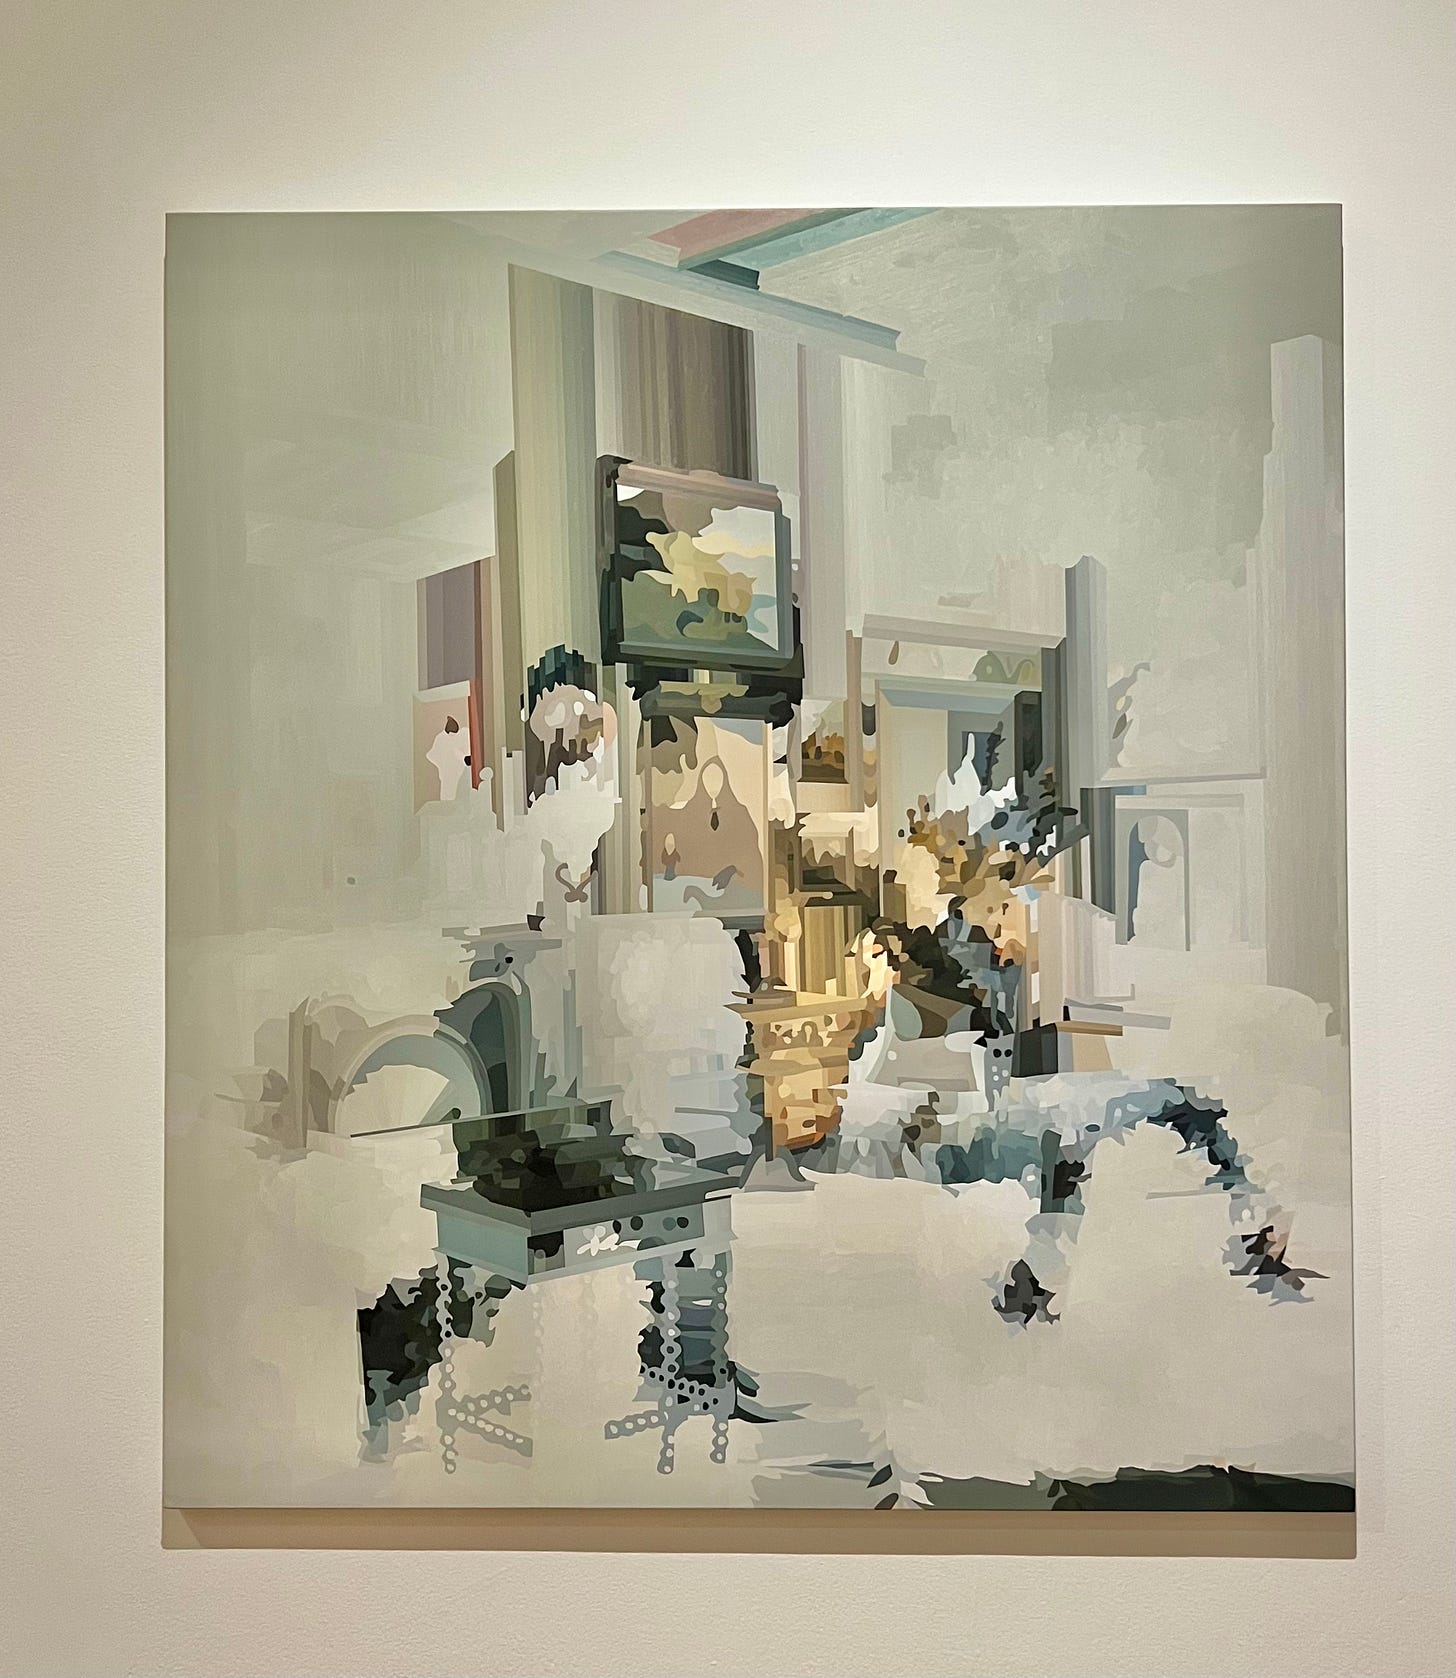 Color photo of a large painting in white, grey and yellow palette showing overlaid images of a woman on a horse and an interior space in abstracted patterns